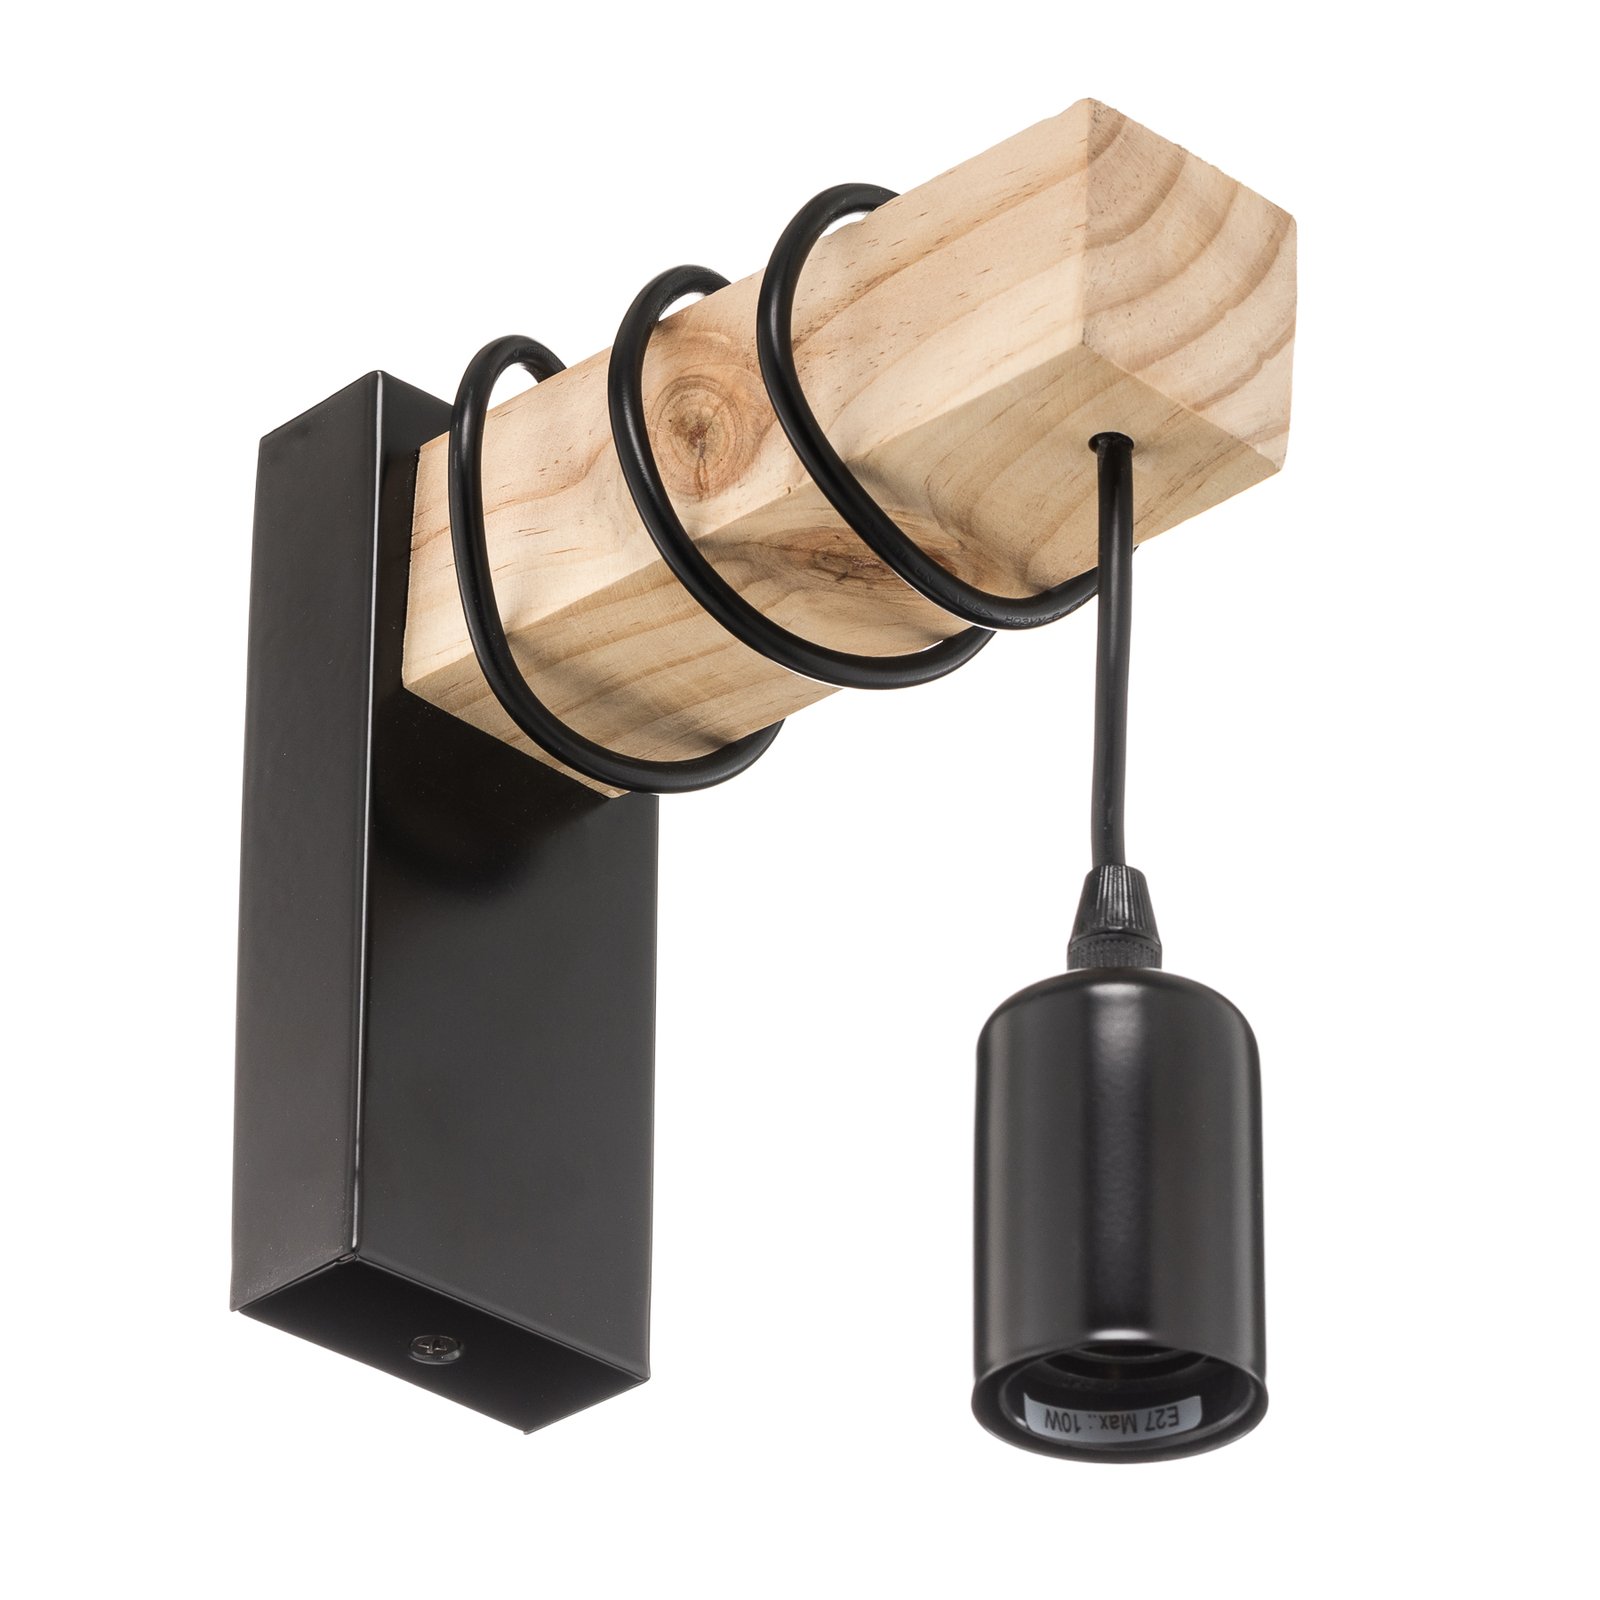 Townshend wall light with a wooden element